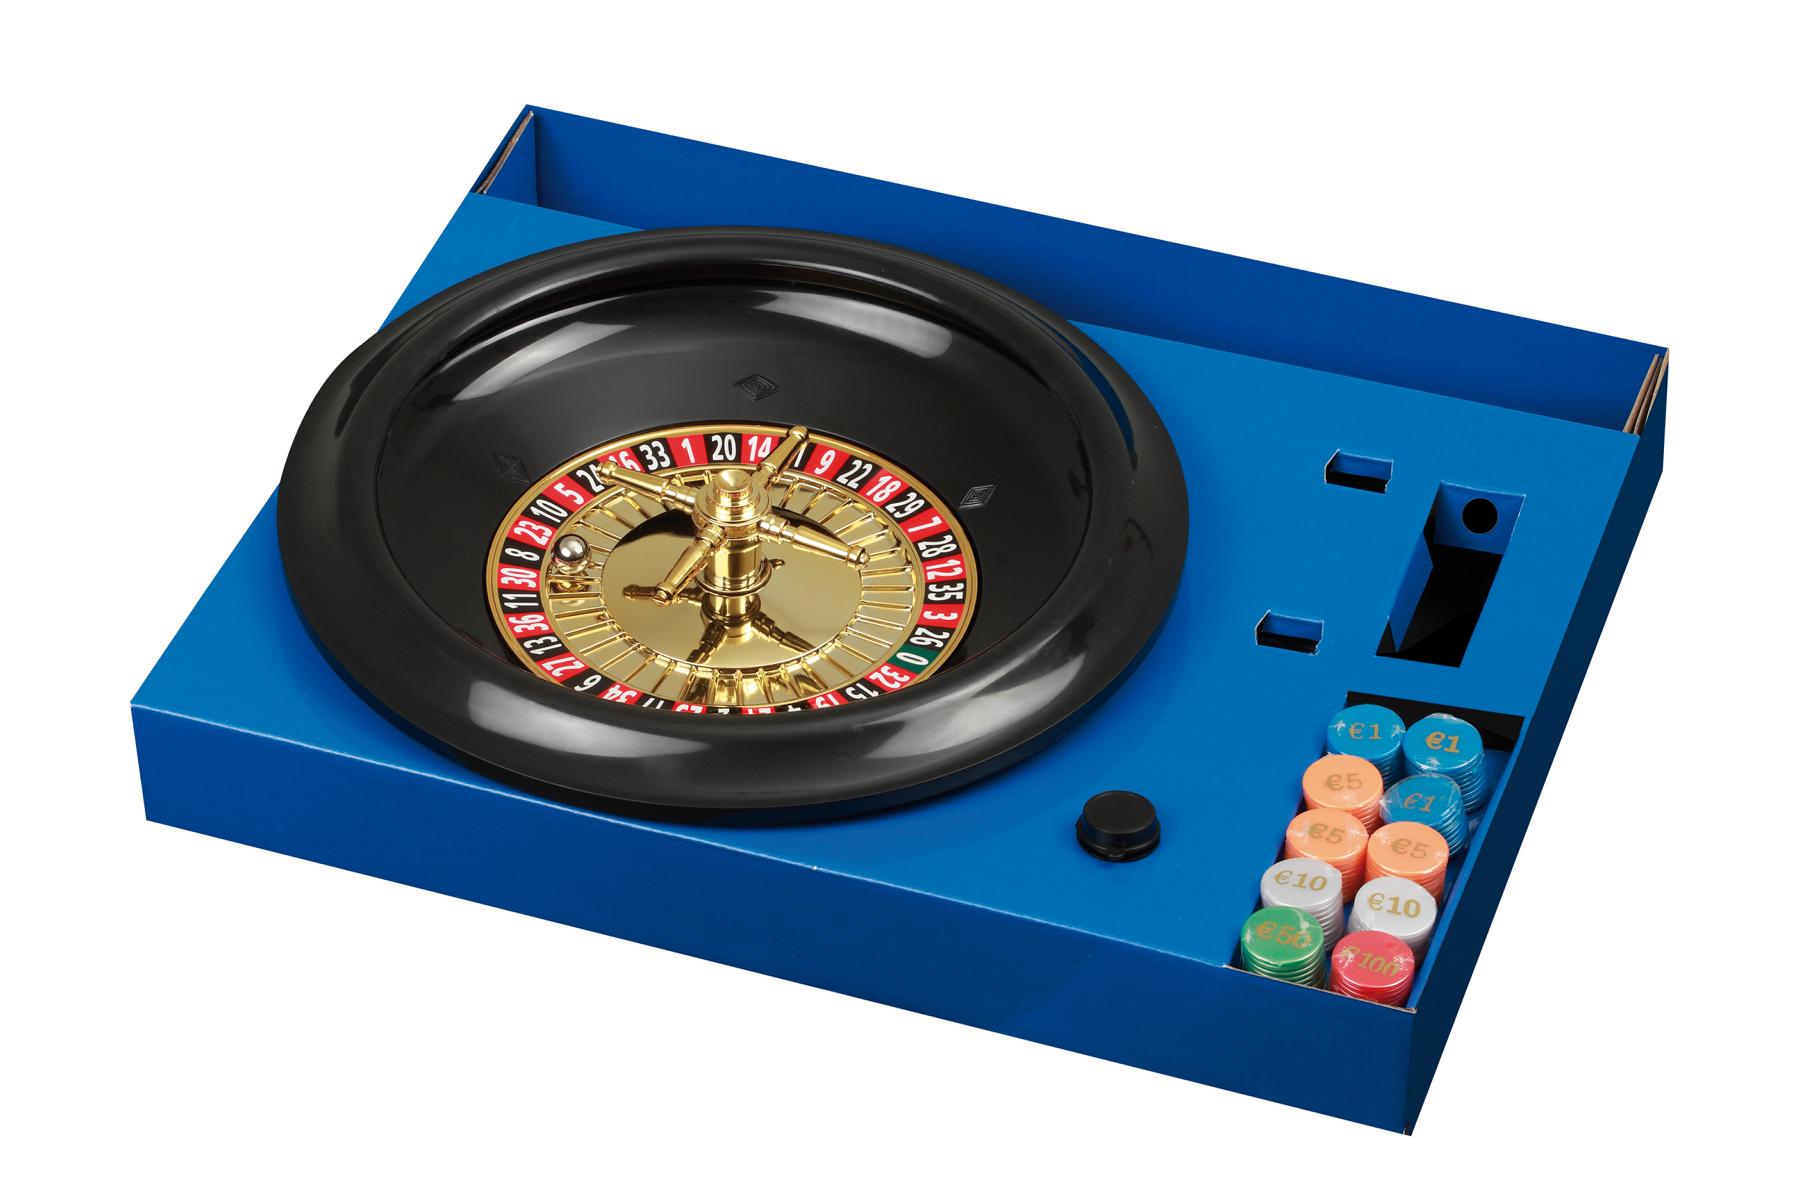 Roulette Set, standard, with plastic plate